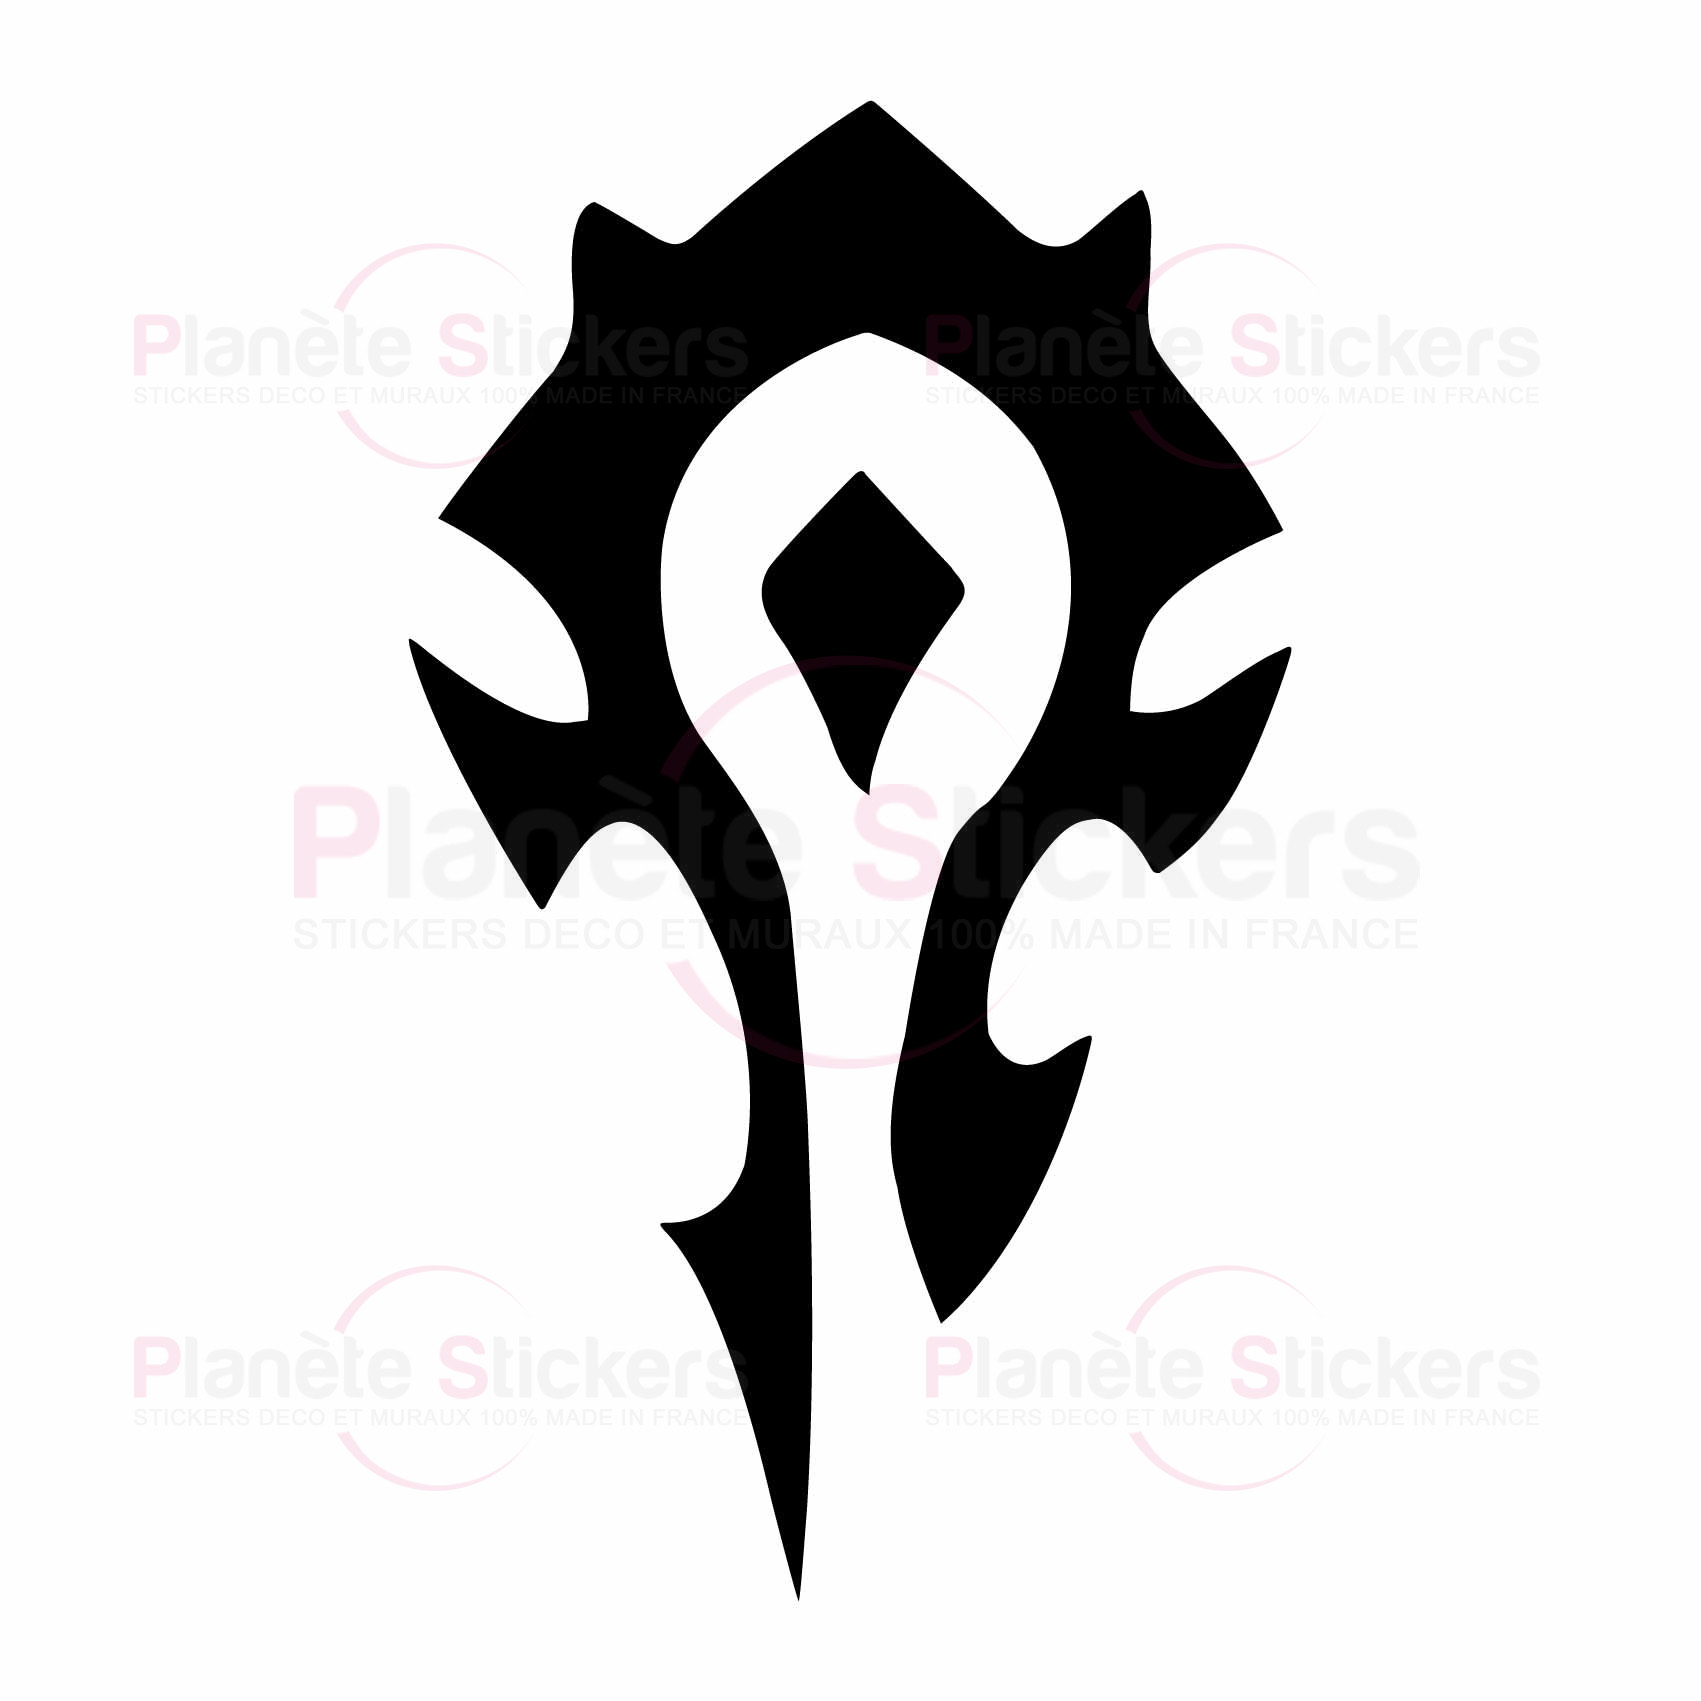 stickers-blason-horde-wow-ref16wow-stickers-muraux-world-of-warcraft-autocollant-mural-jeux-video-sticker-gamer-deco-gaming-salon-chambre-(2)